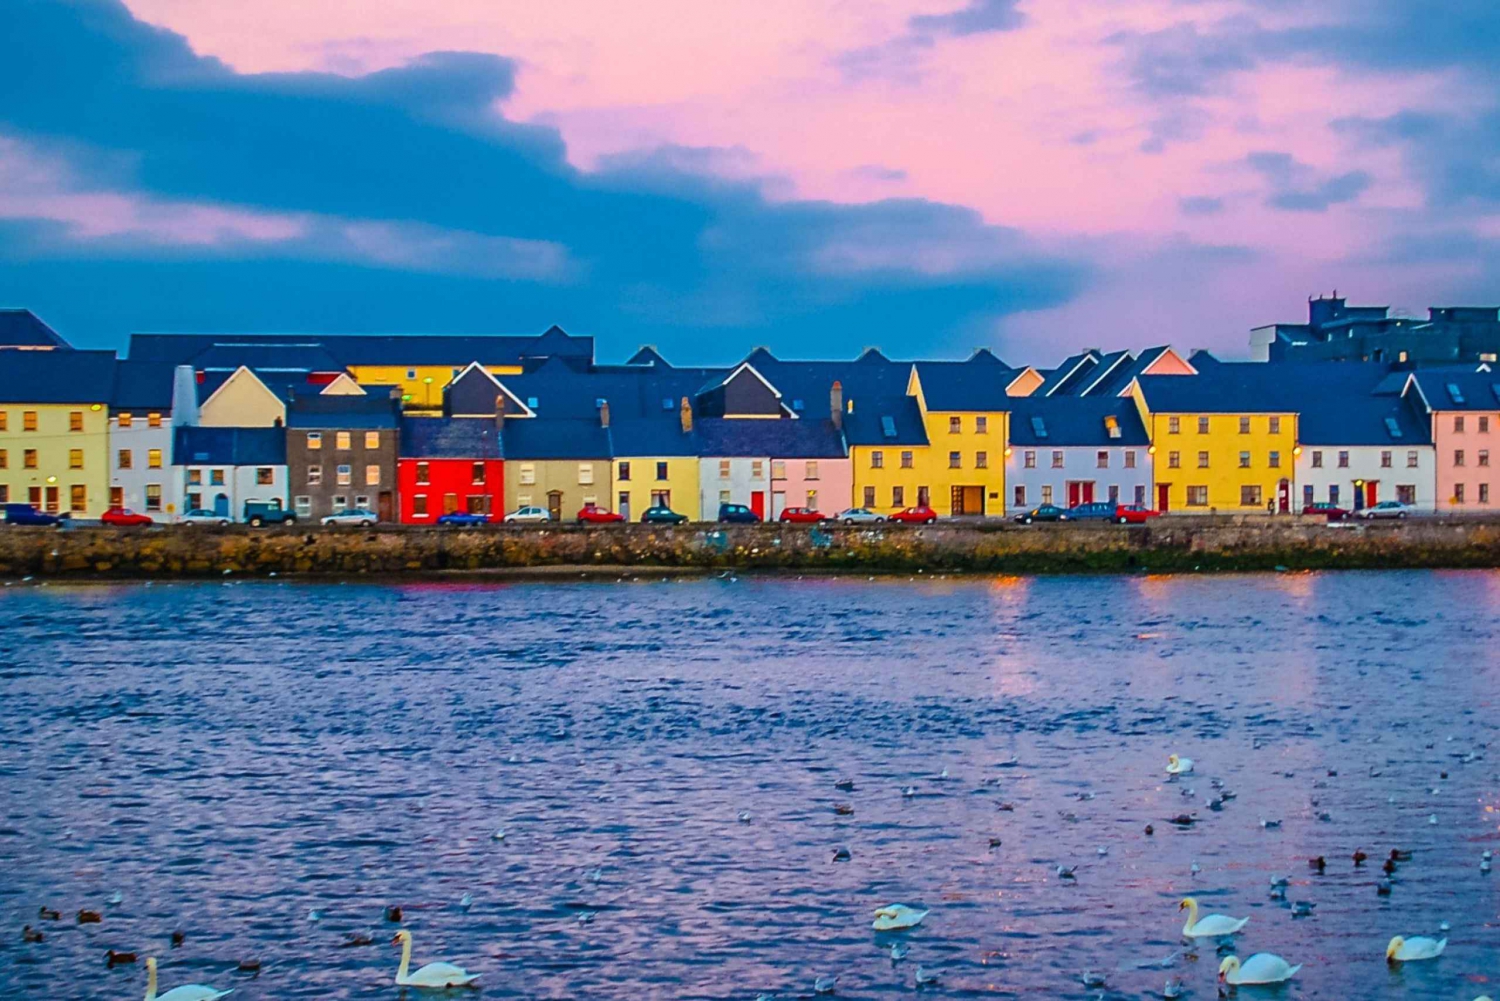 Galway Private Driver: Personalized Tours & Transfers